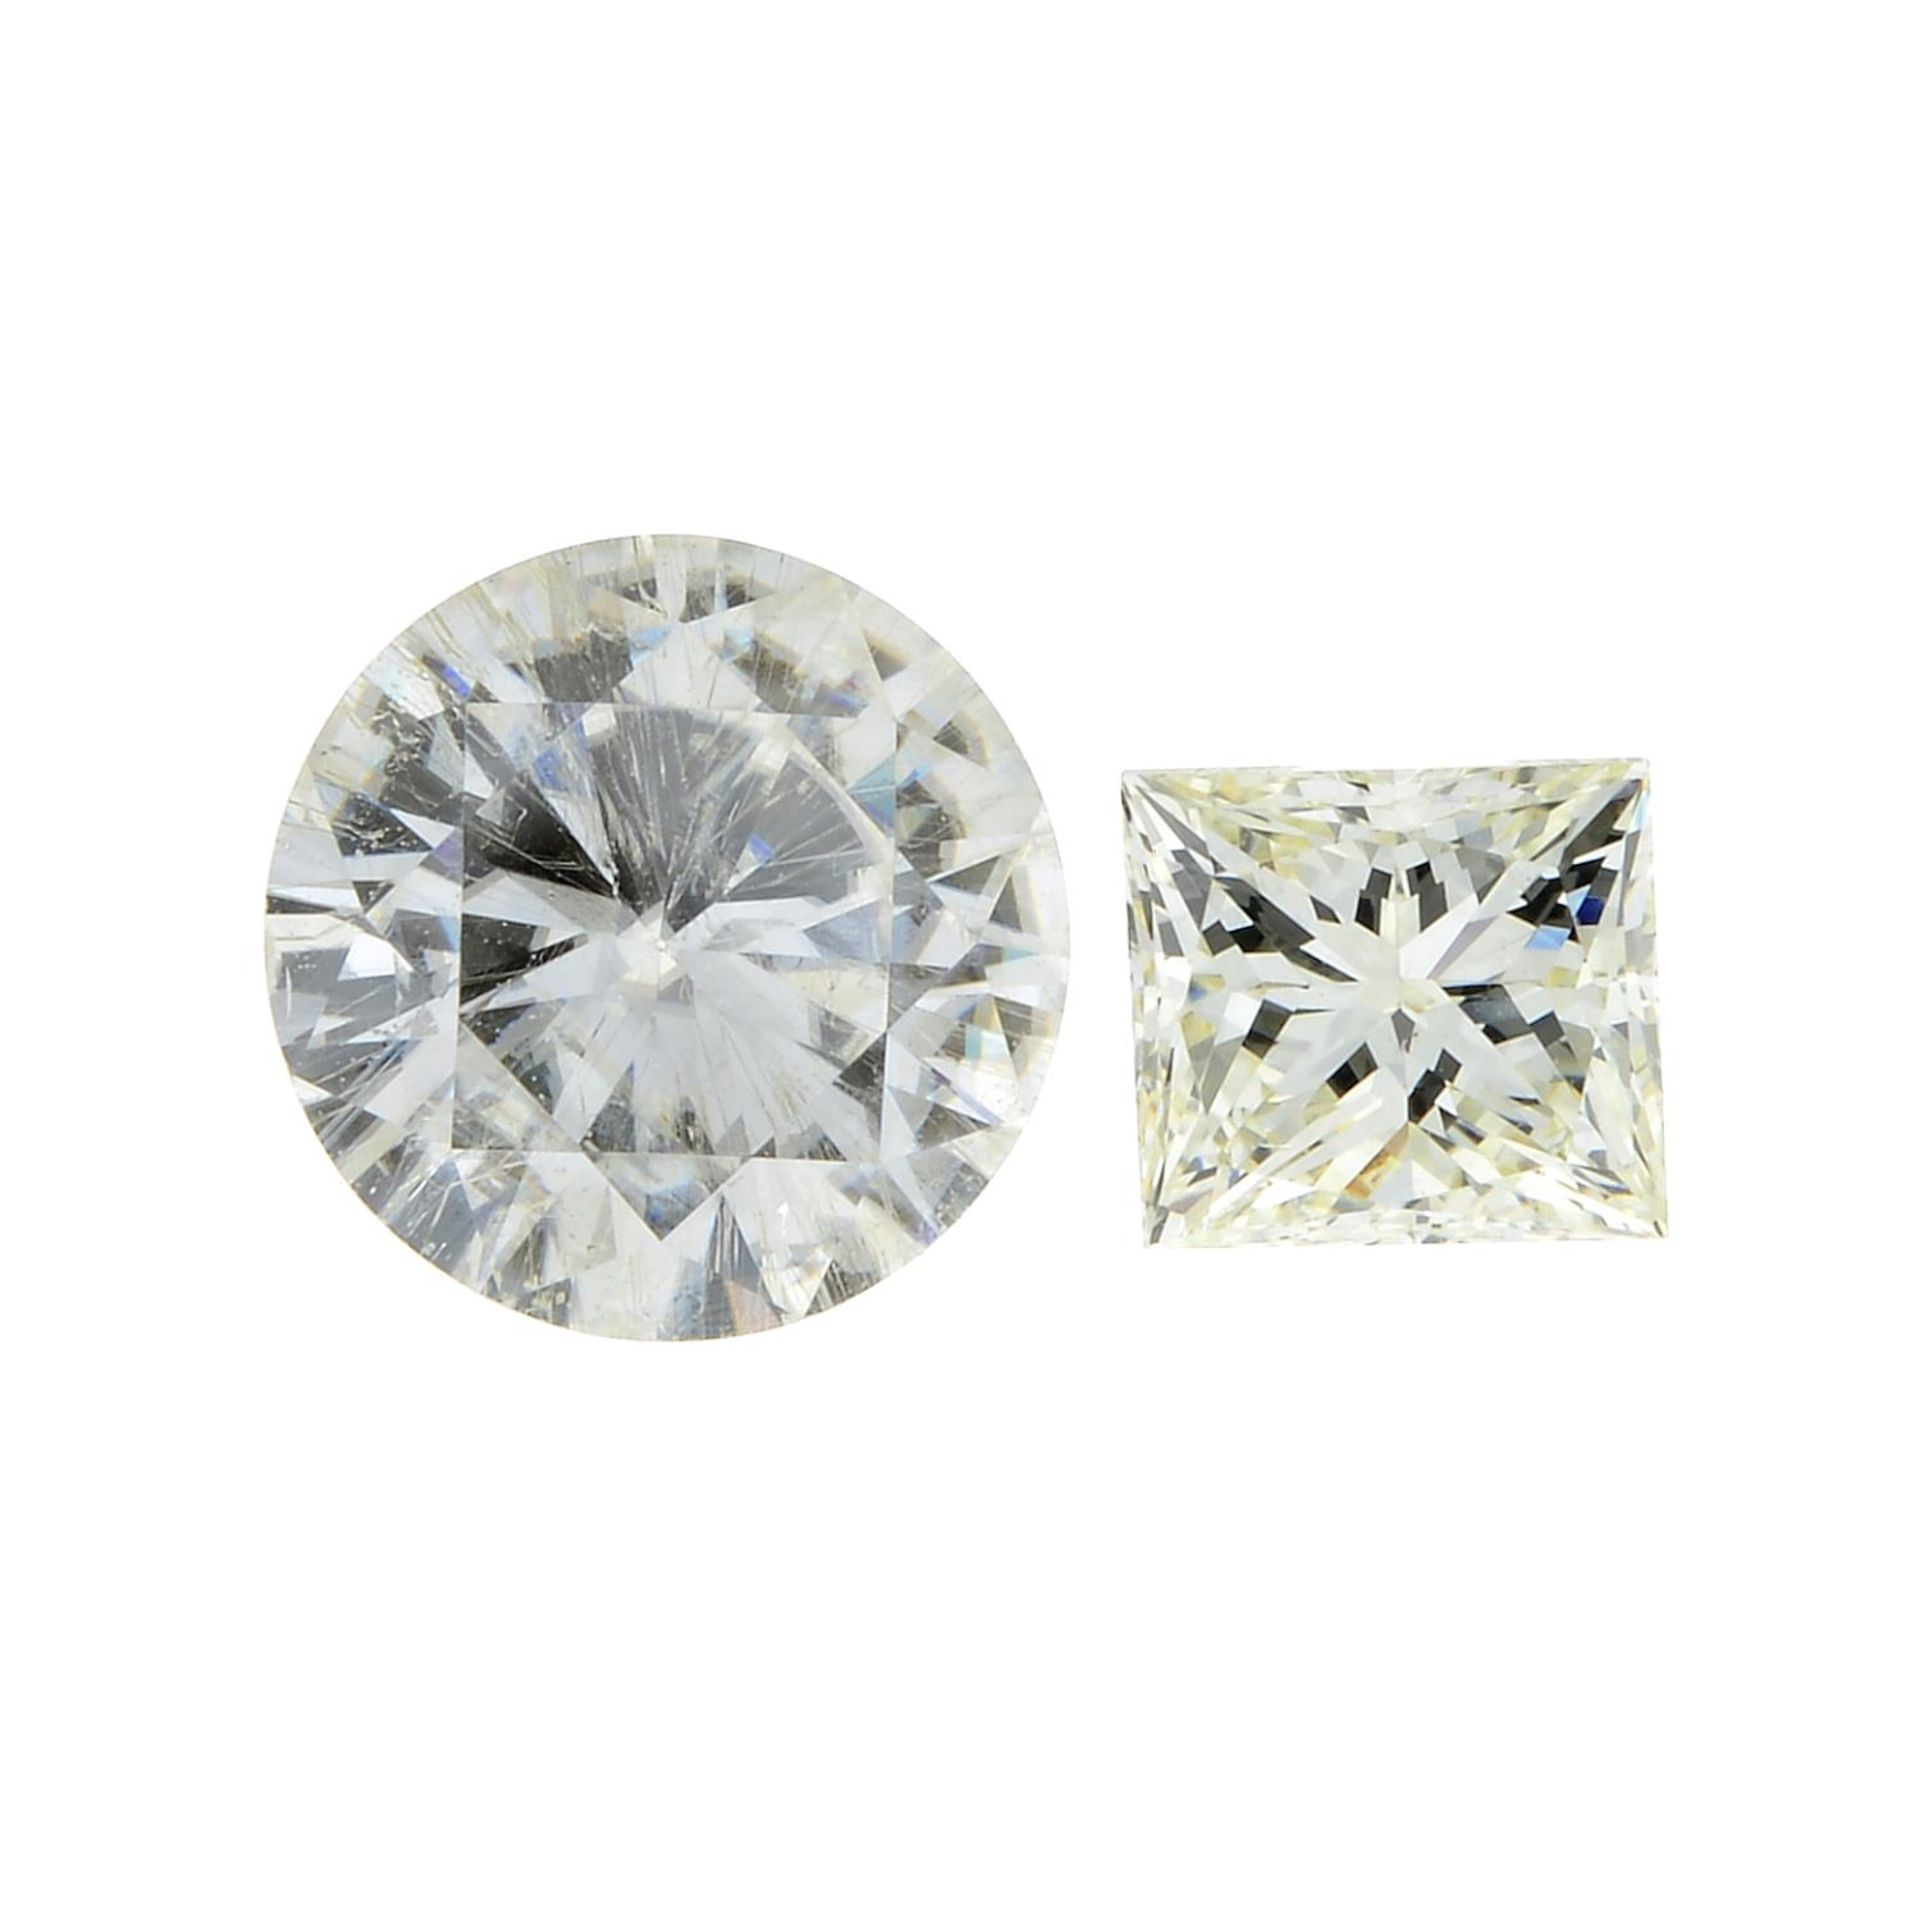 A square-shape diamond, and a circular-shape synthetic moissanite.